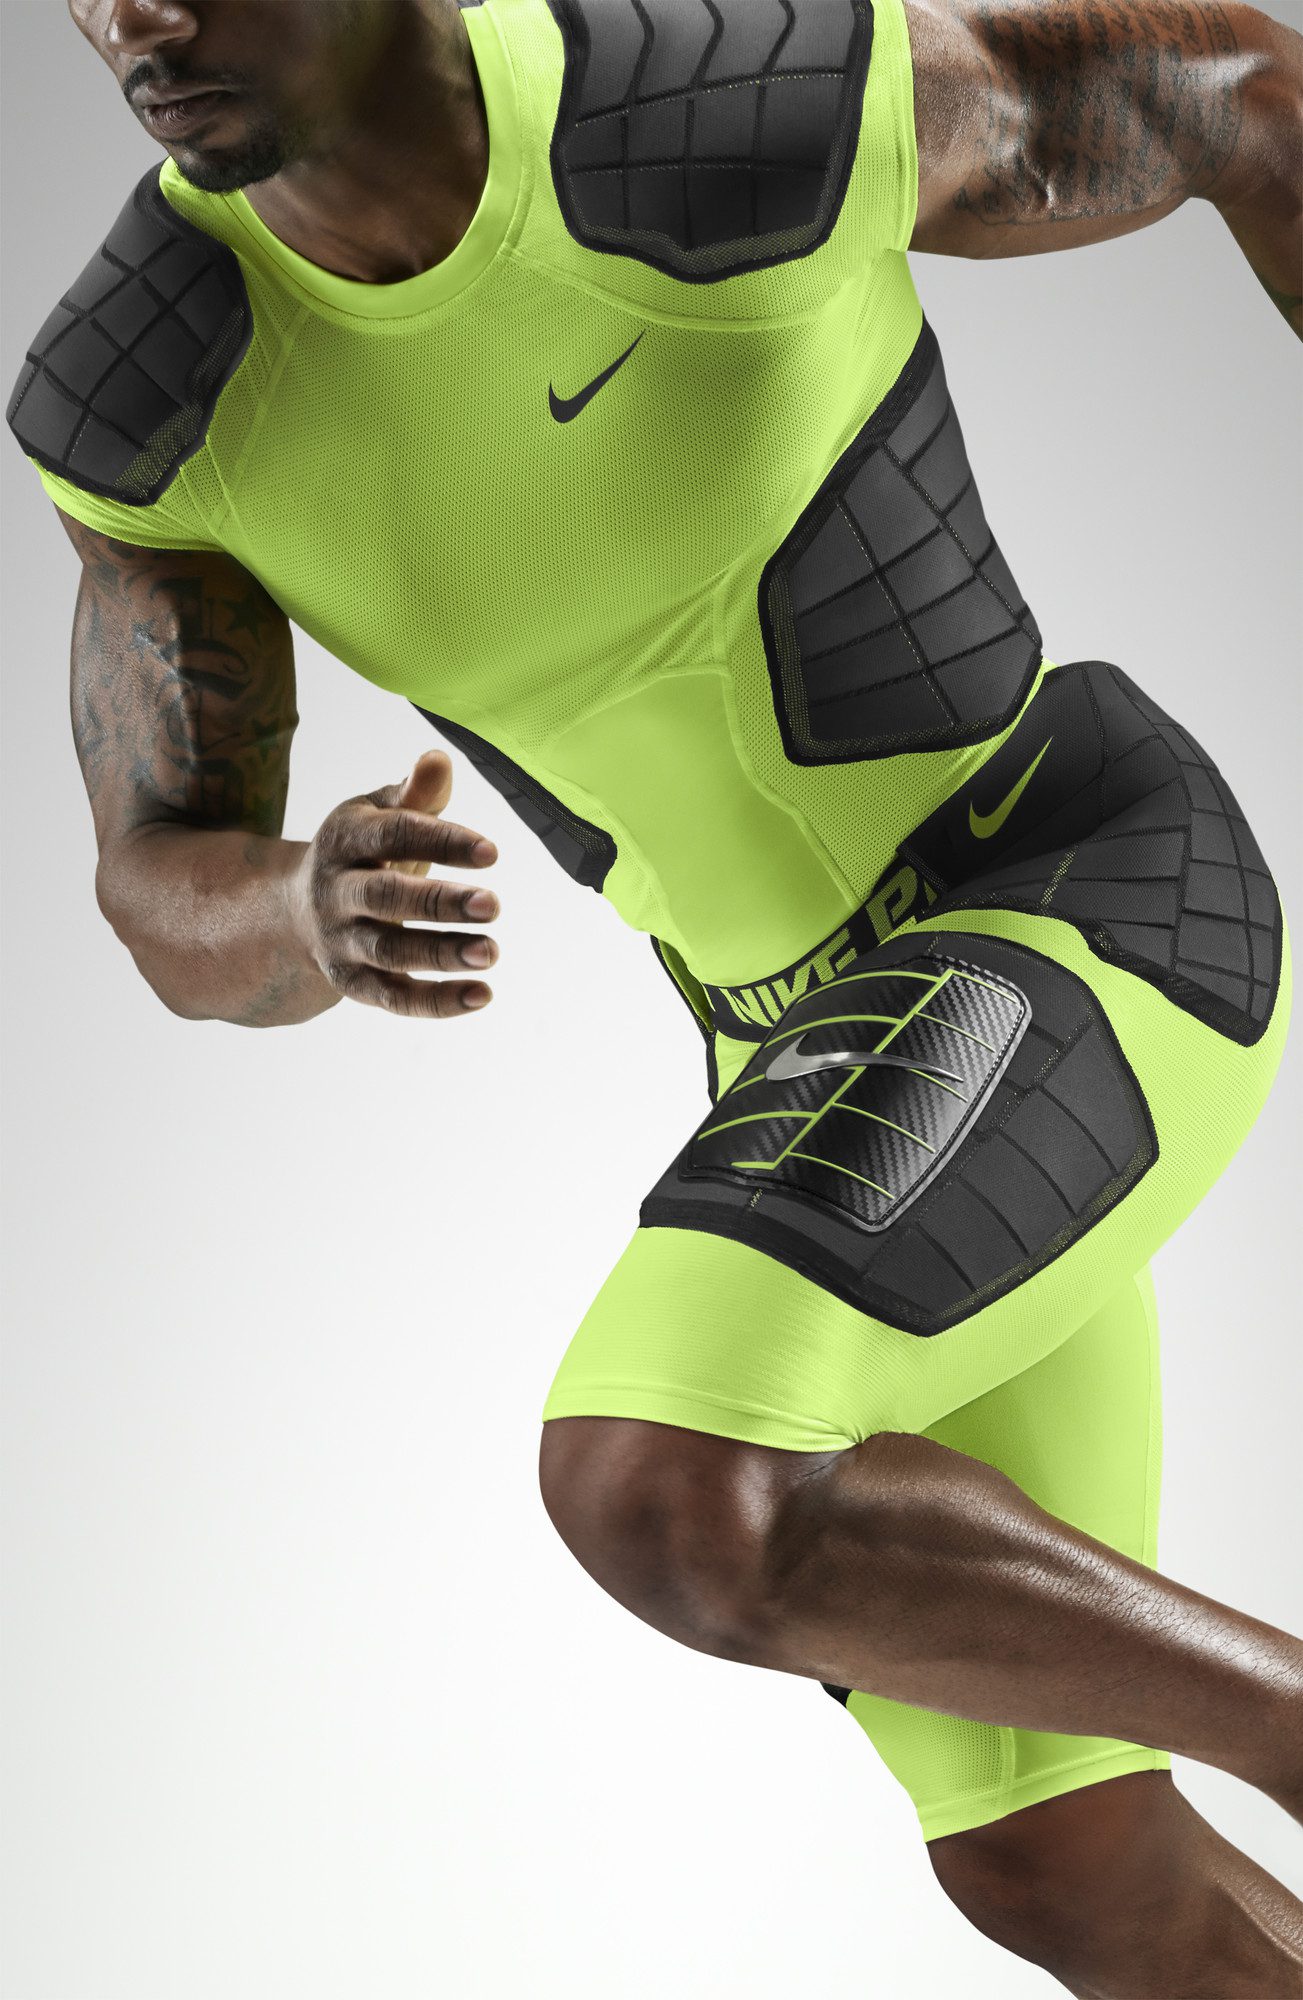 BMF Gridiron: Nike Pro Combat Hyperstrong 3.0 - Hardwood and Hollywood